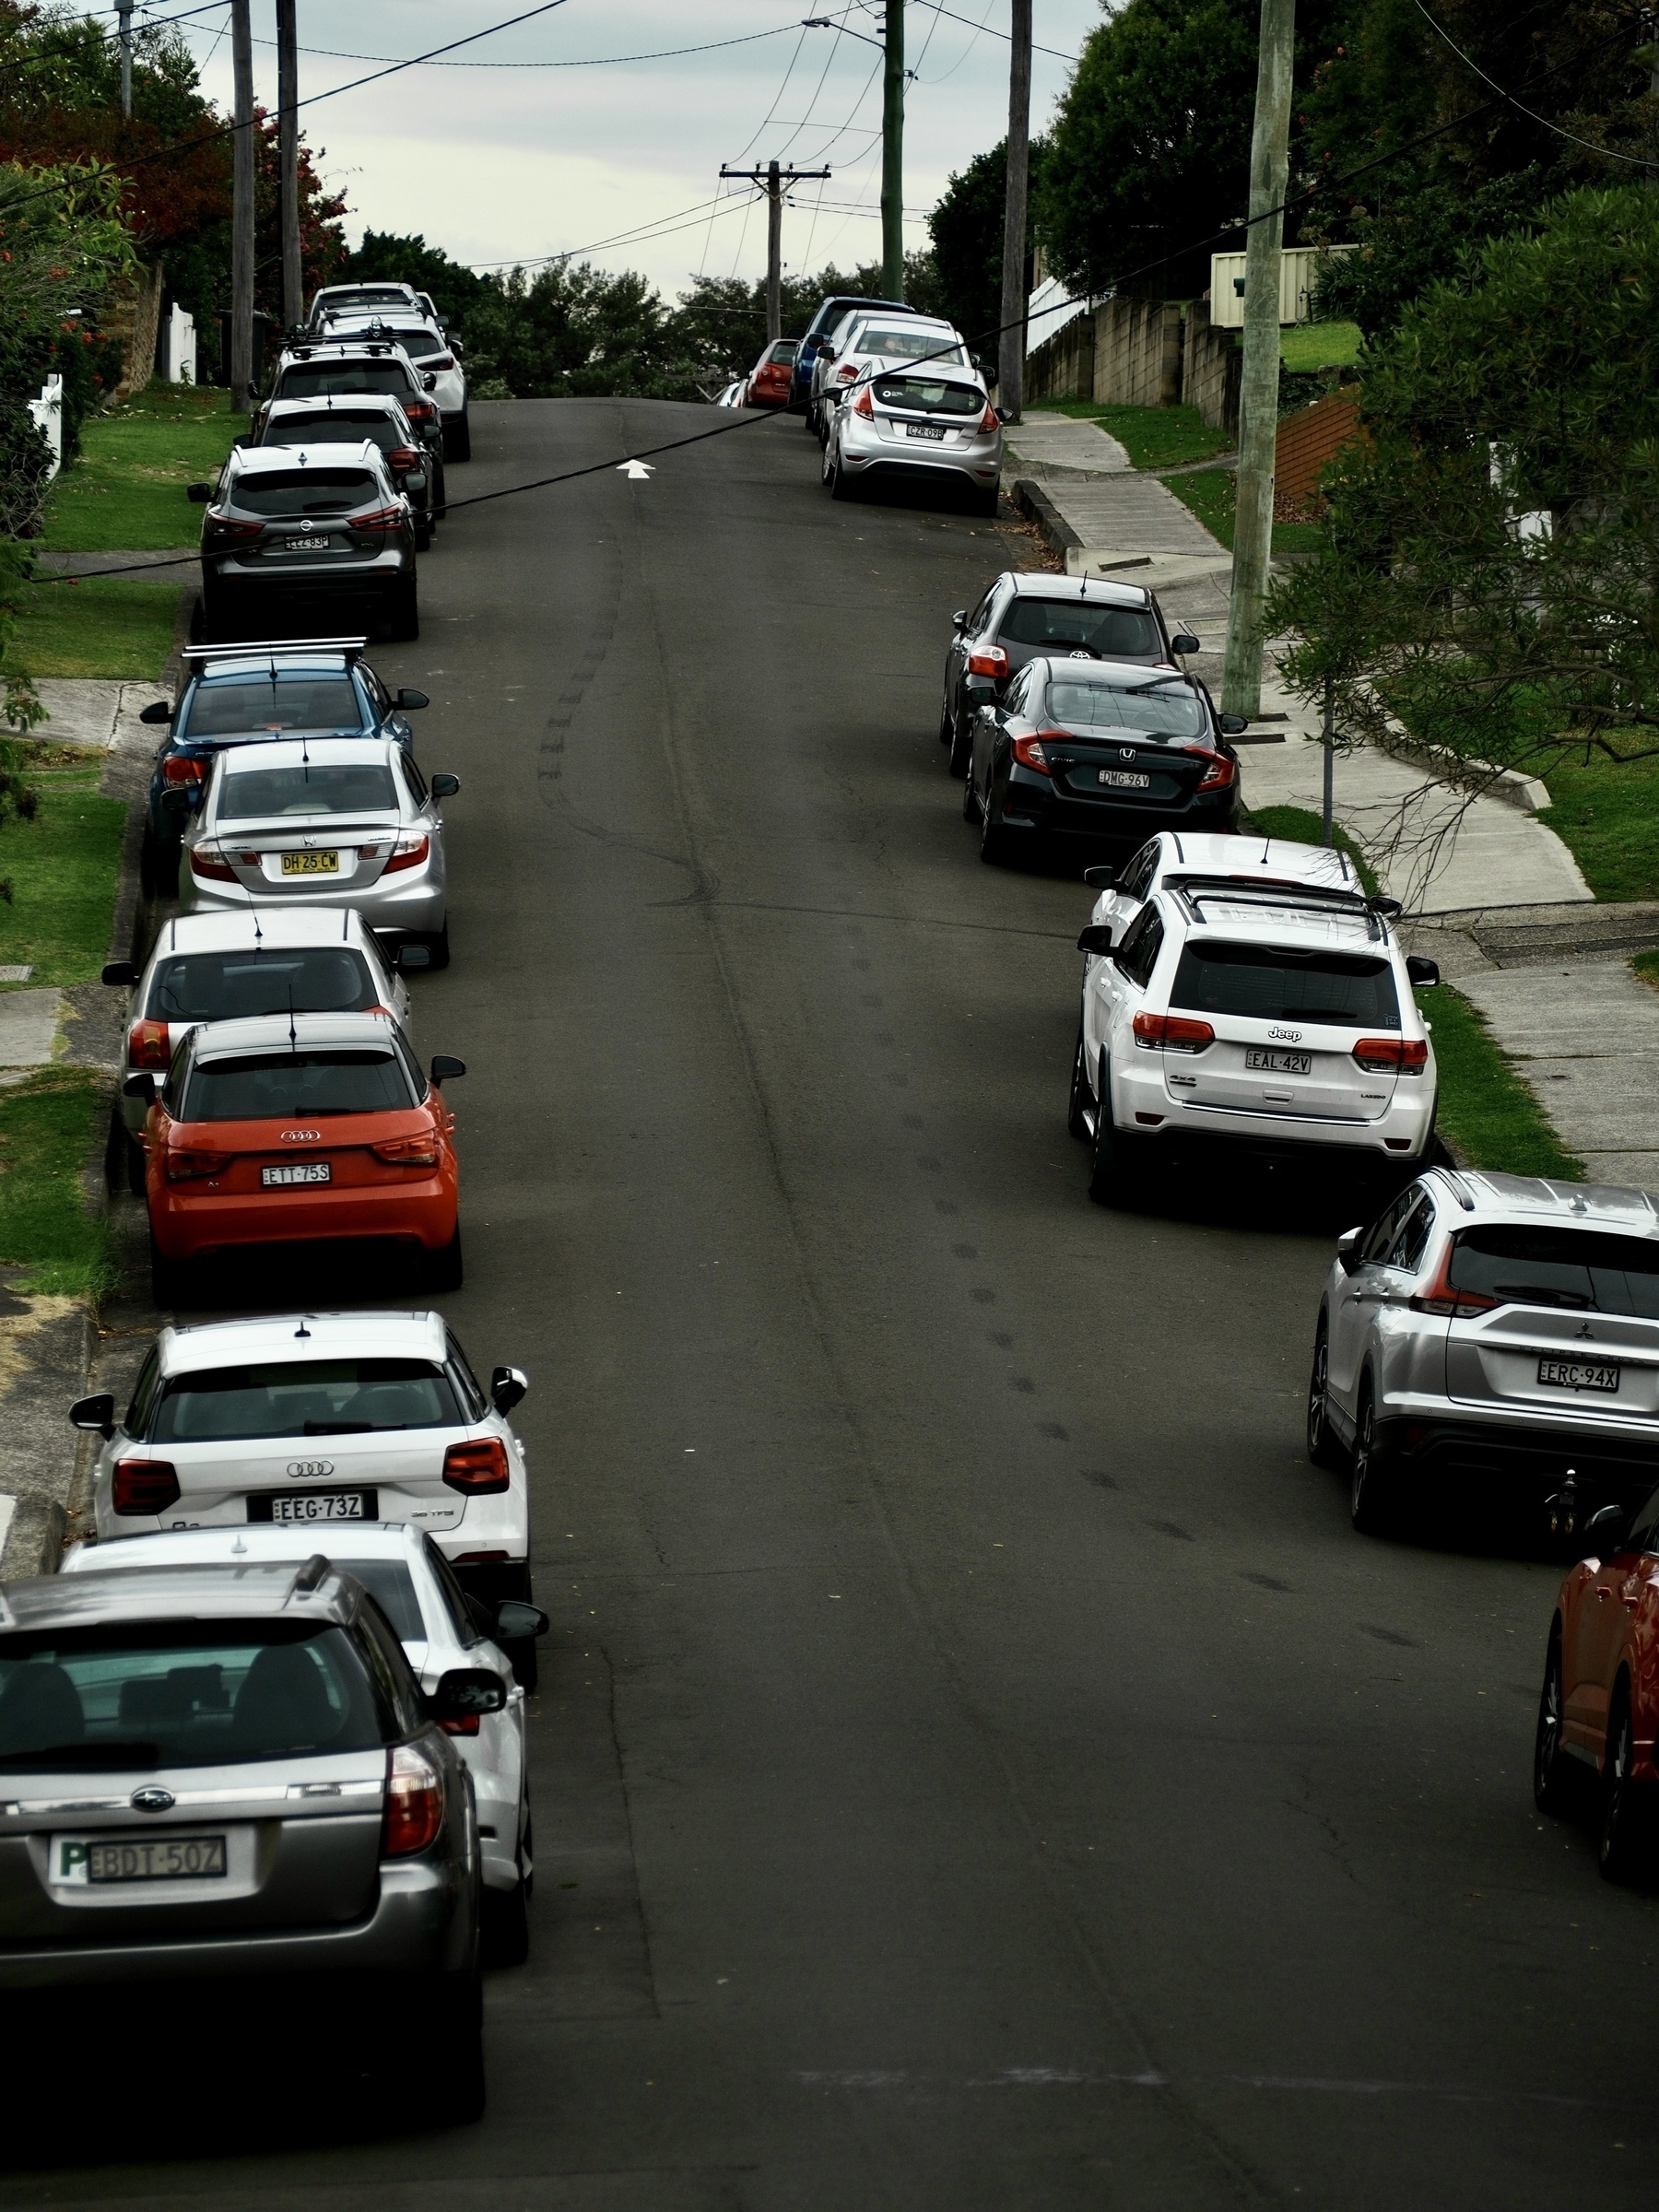 A suburban street on a hill, covered in cars and tyre marks